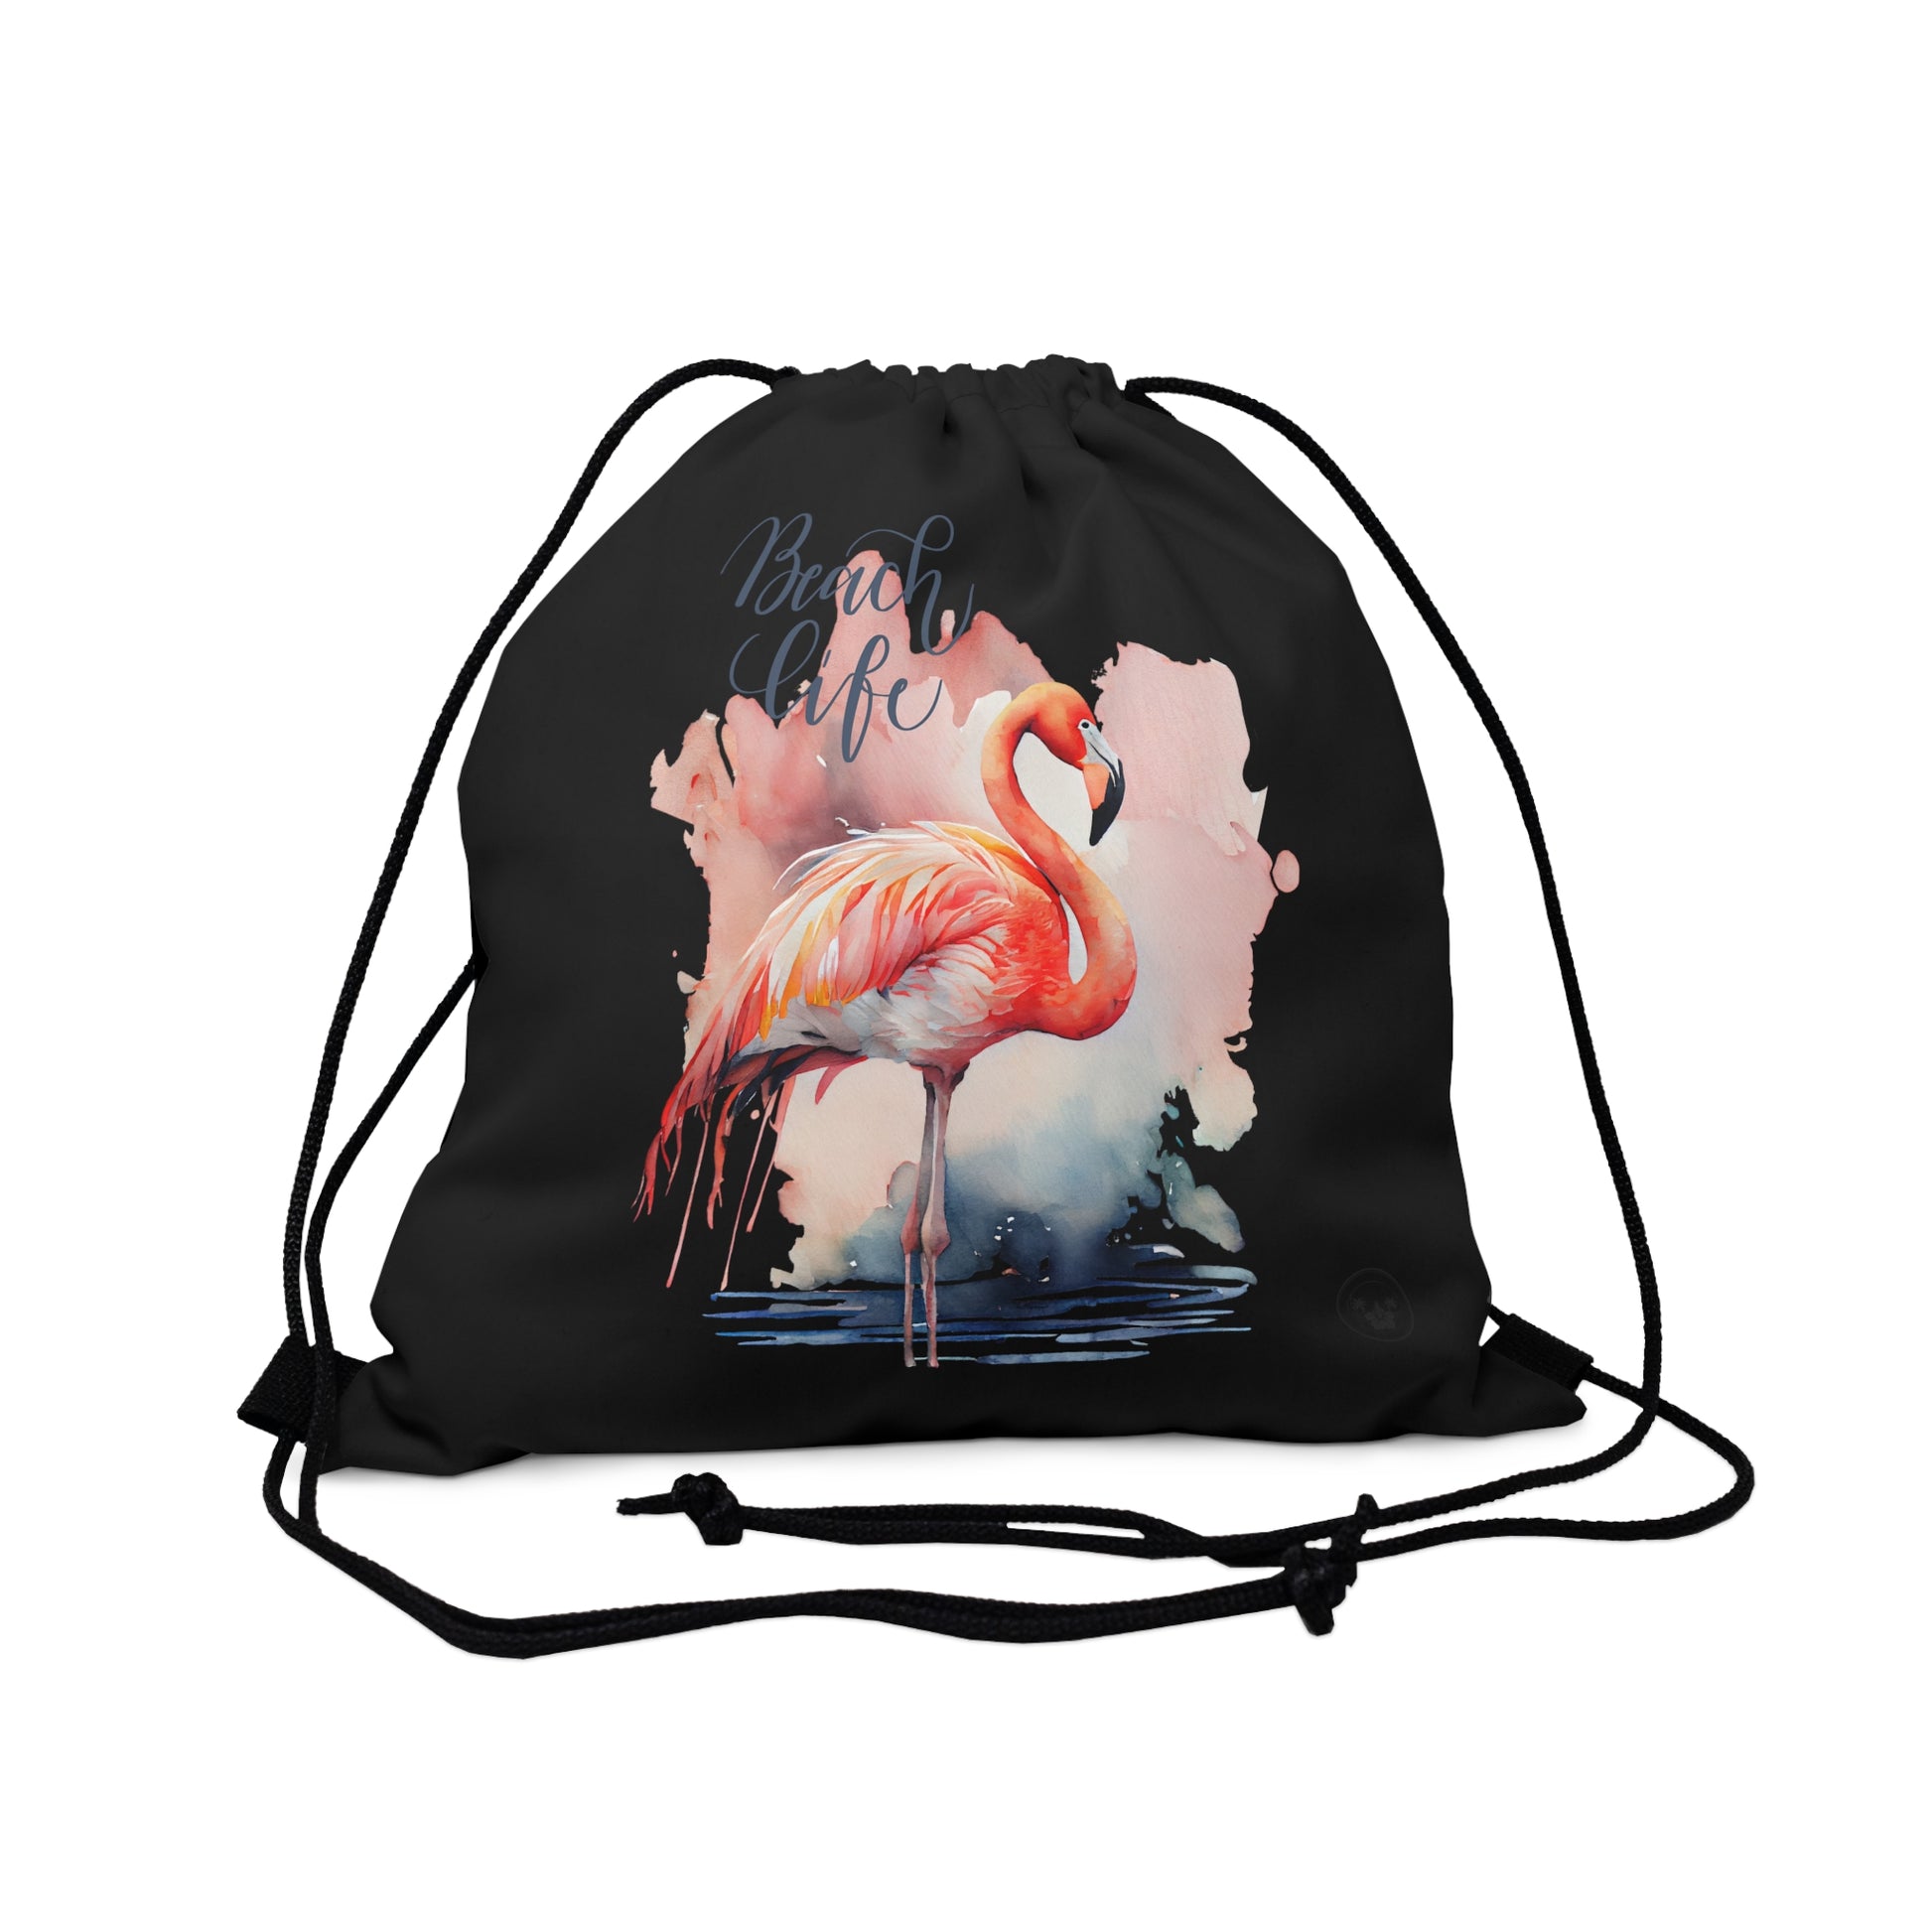 Unleash your wanderlust with our versatile drawstring backpack! Embrace travel with ease and style, flaunting a Beach Life Flamingo graphic with bright color backgrounds. This one is a black background. Designed for adventurers, it's the perfect blend of practicality and fashion. Get yours today for your next adventure! This is a front view of the backpack. 